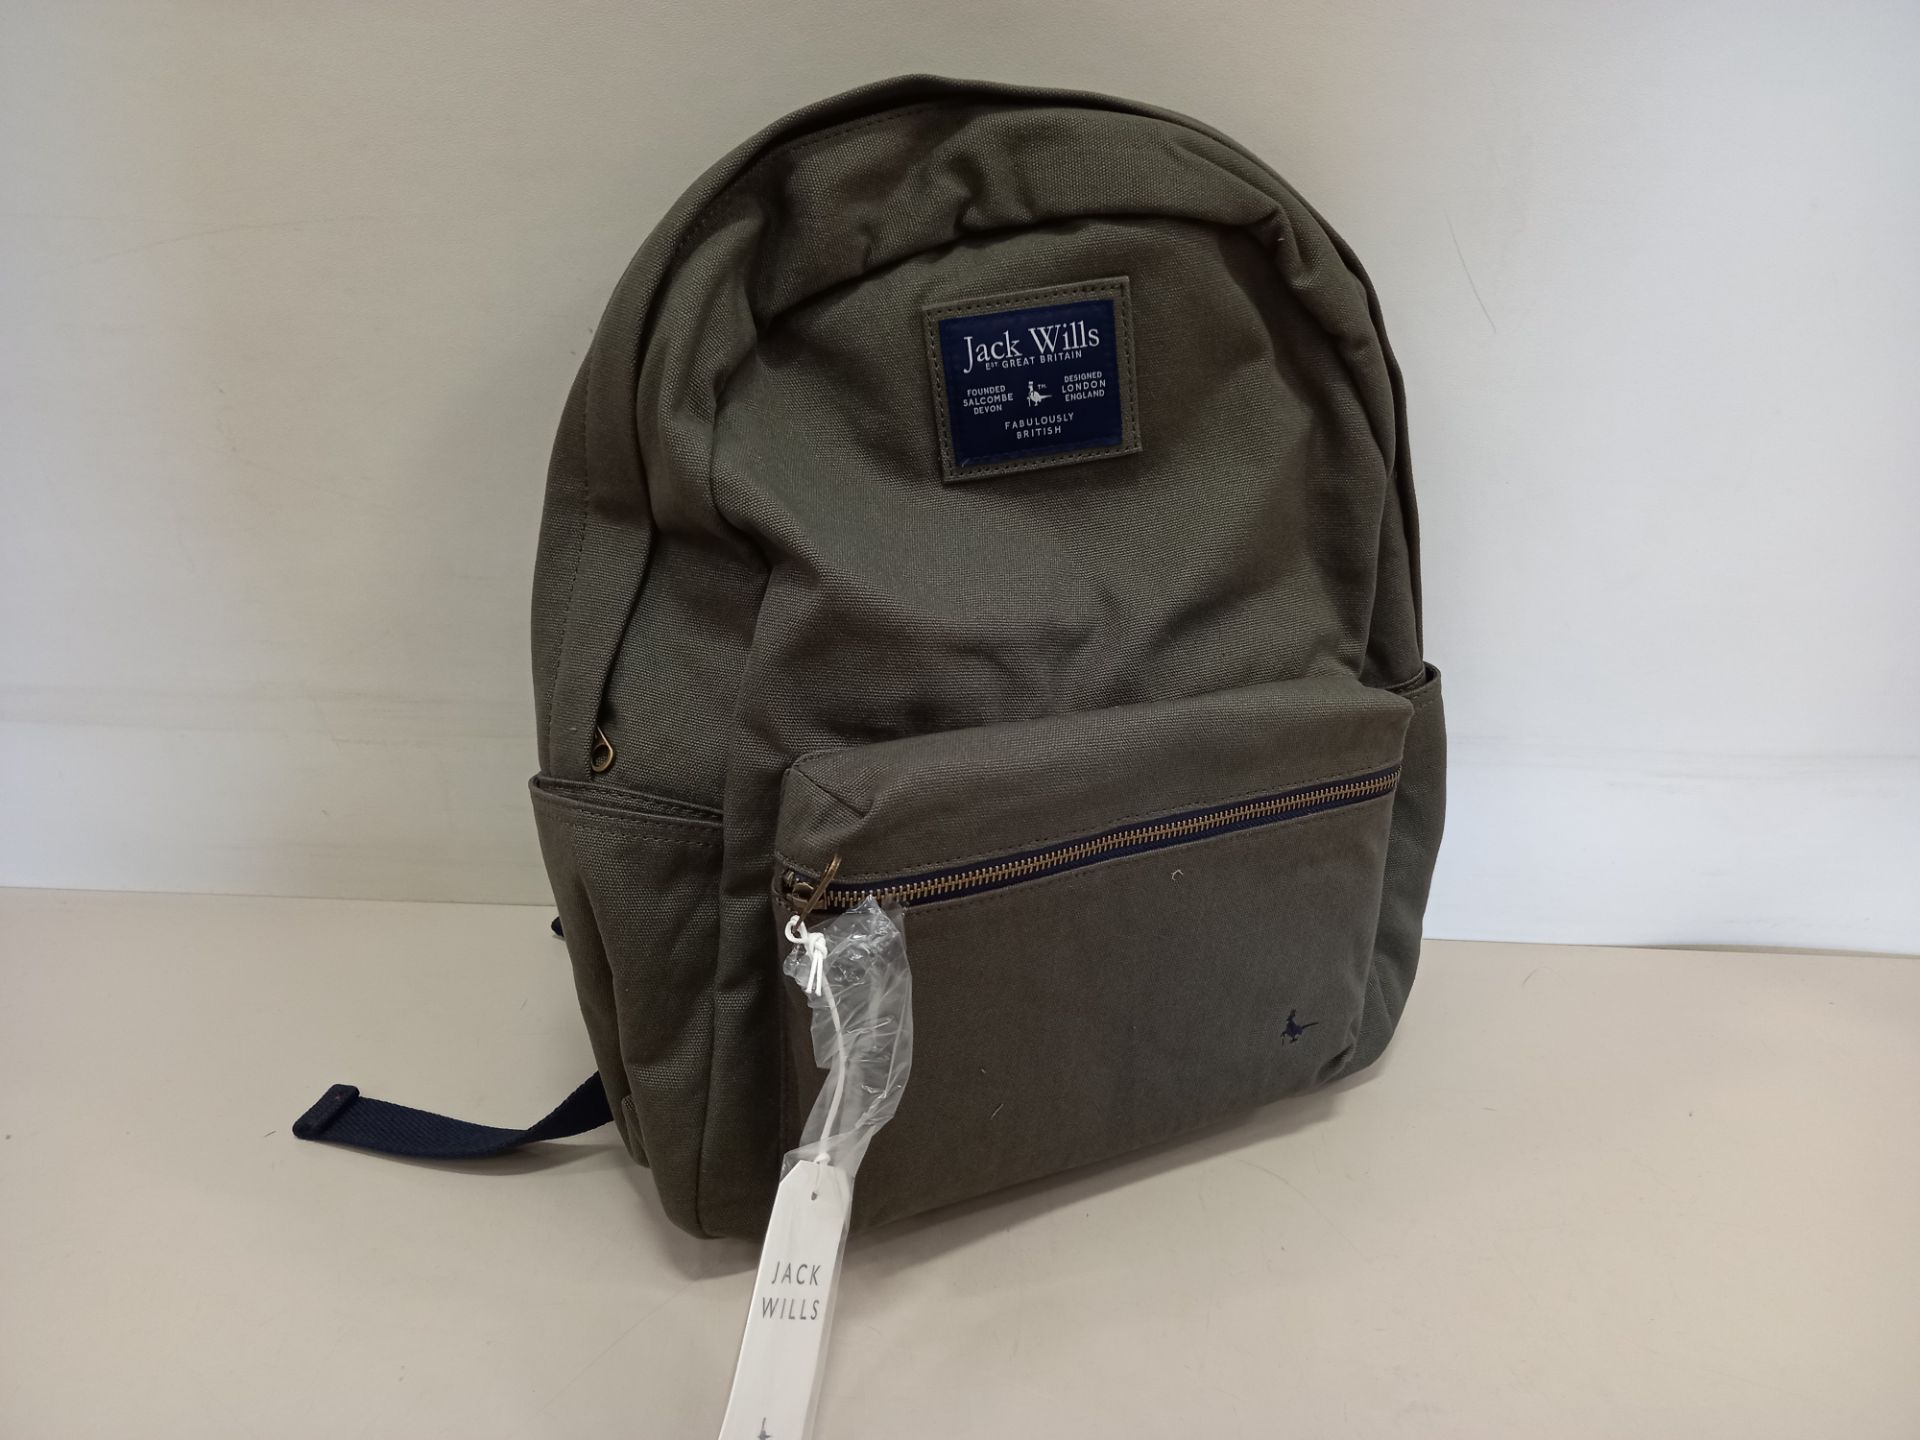 8 X BRAND NEW JACK WILLS STANLEY CANVAS BACKPACKS IN KHAKI WITH SWING TICKETS RRP £44.95 EACH